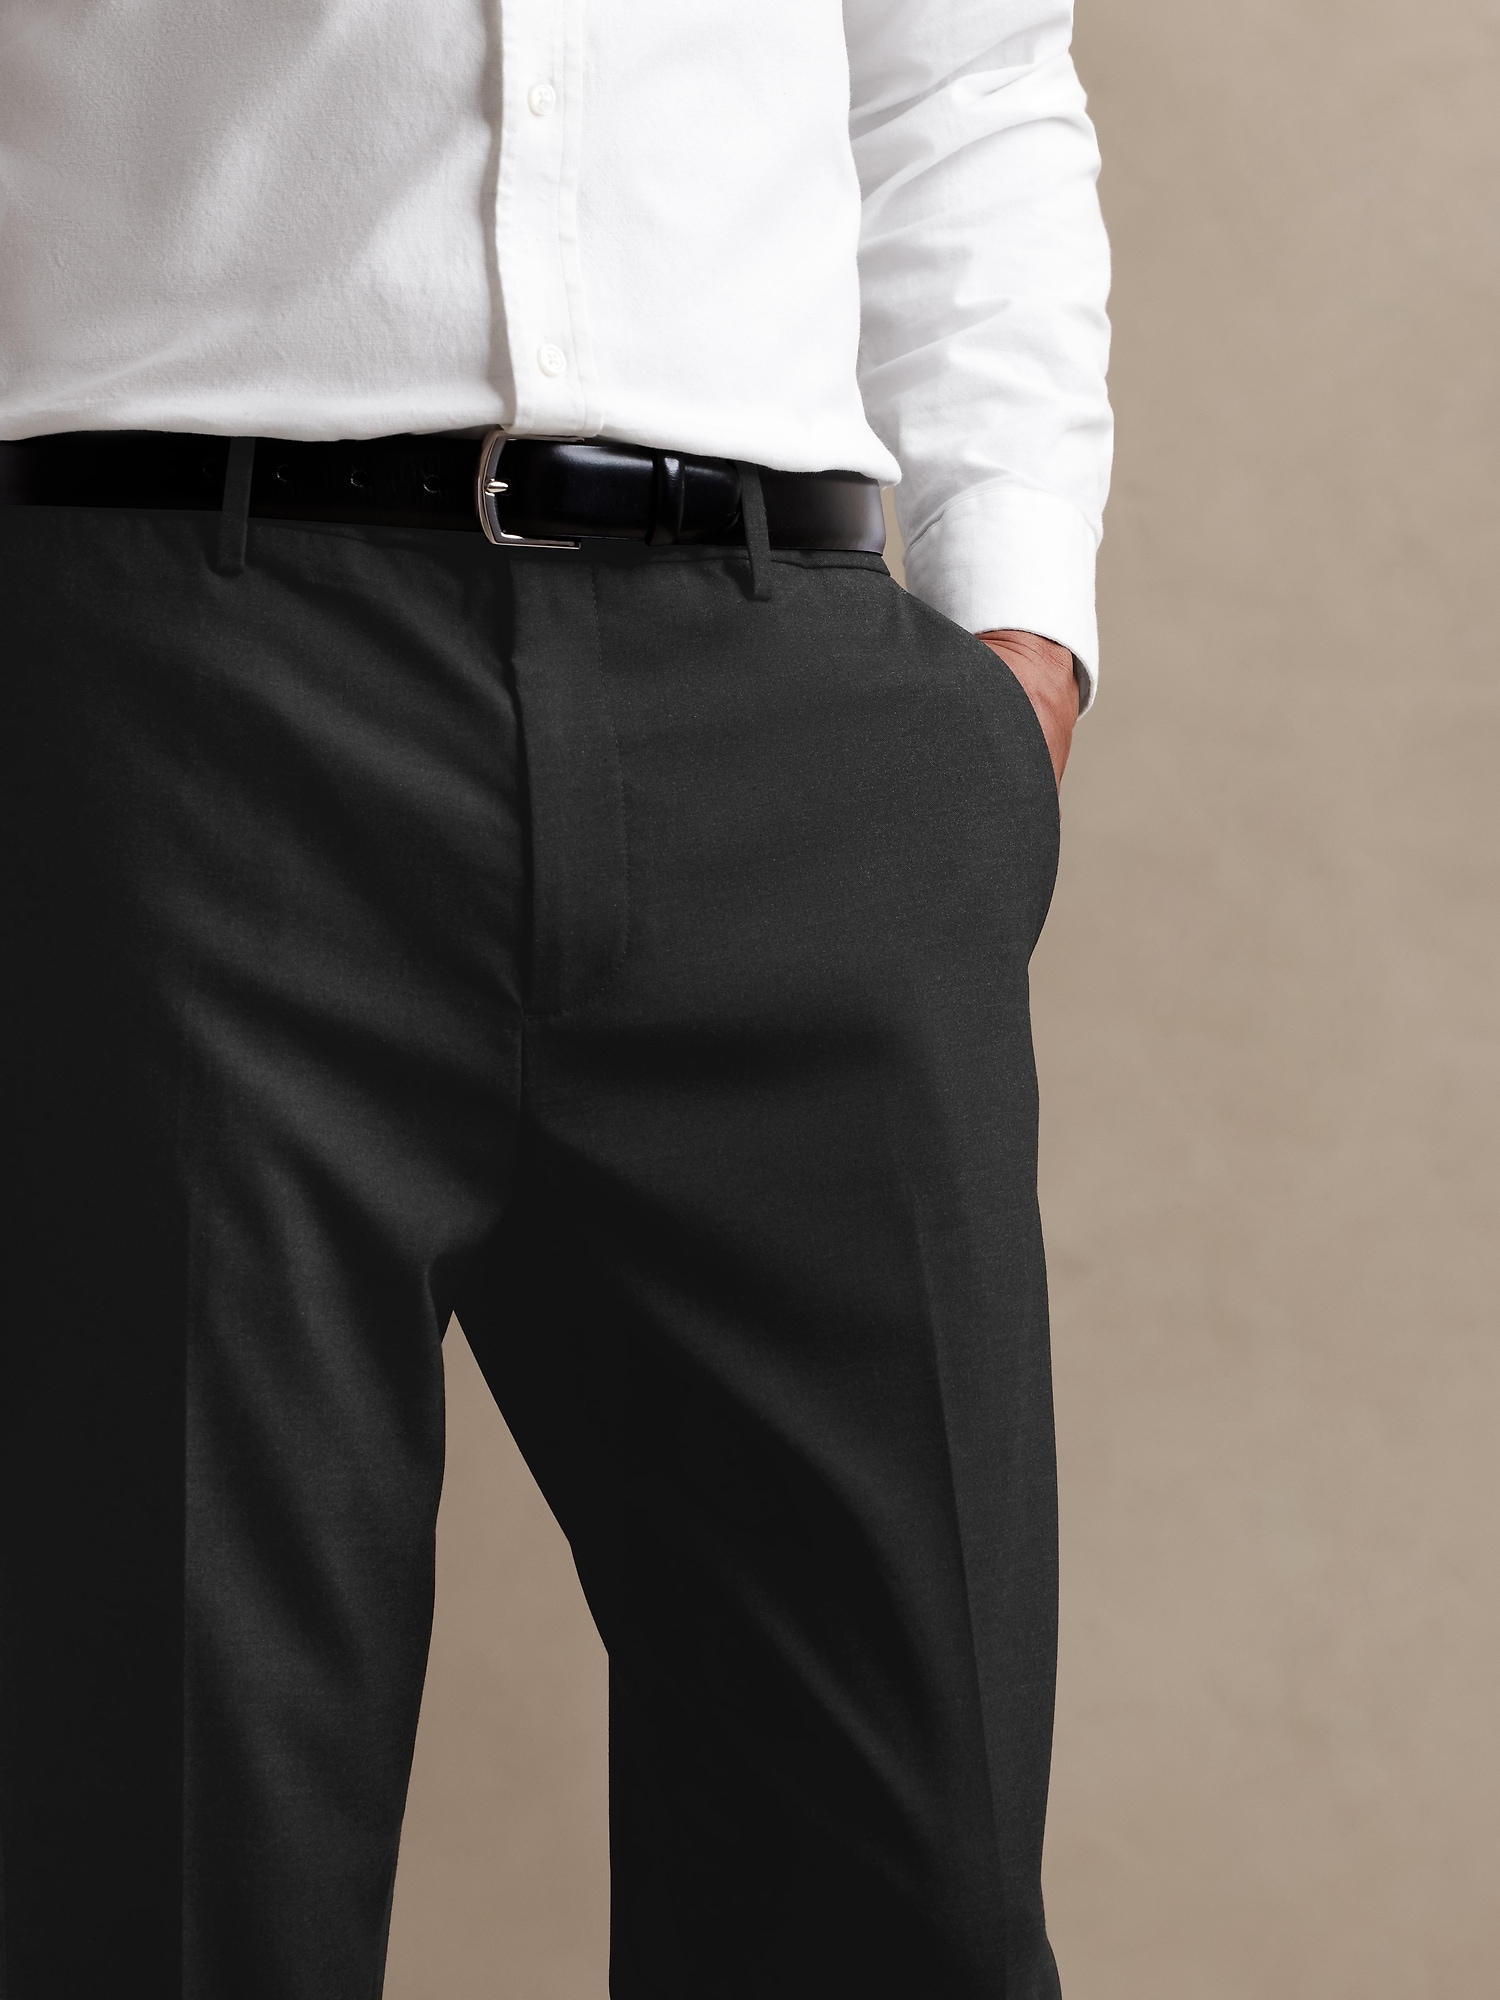 Mens Formal Trousers - Maroon in Ludhiana at best price by Ved Enterprises  - Justdial